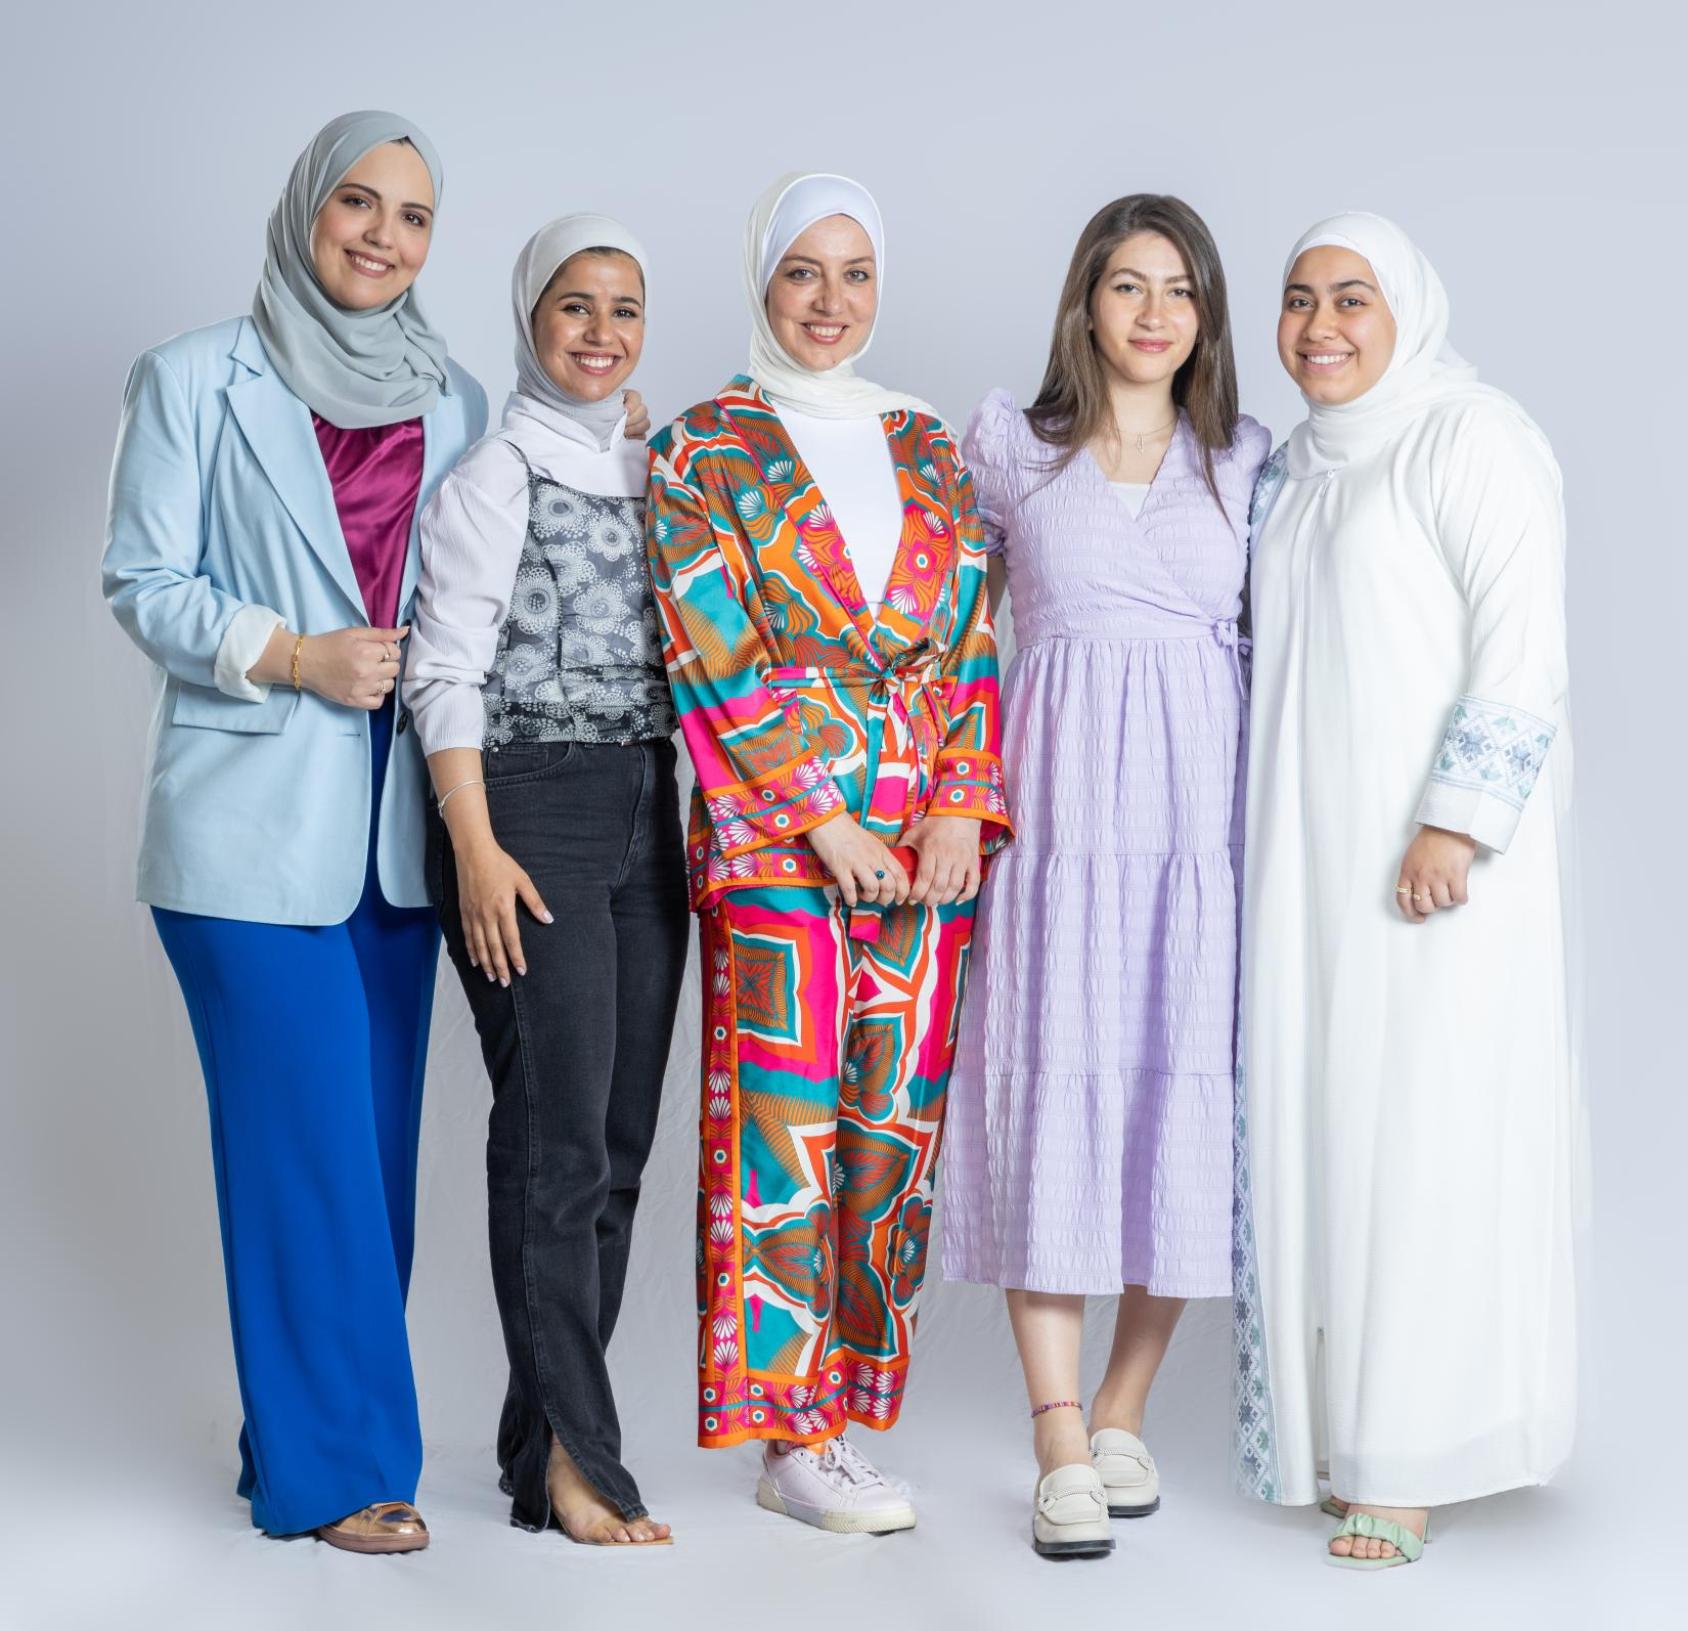 A group of five women in colourful clothes and headscarves stand next to each other smiling.